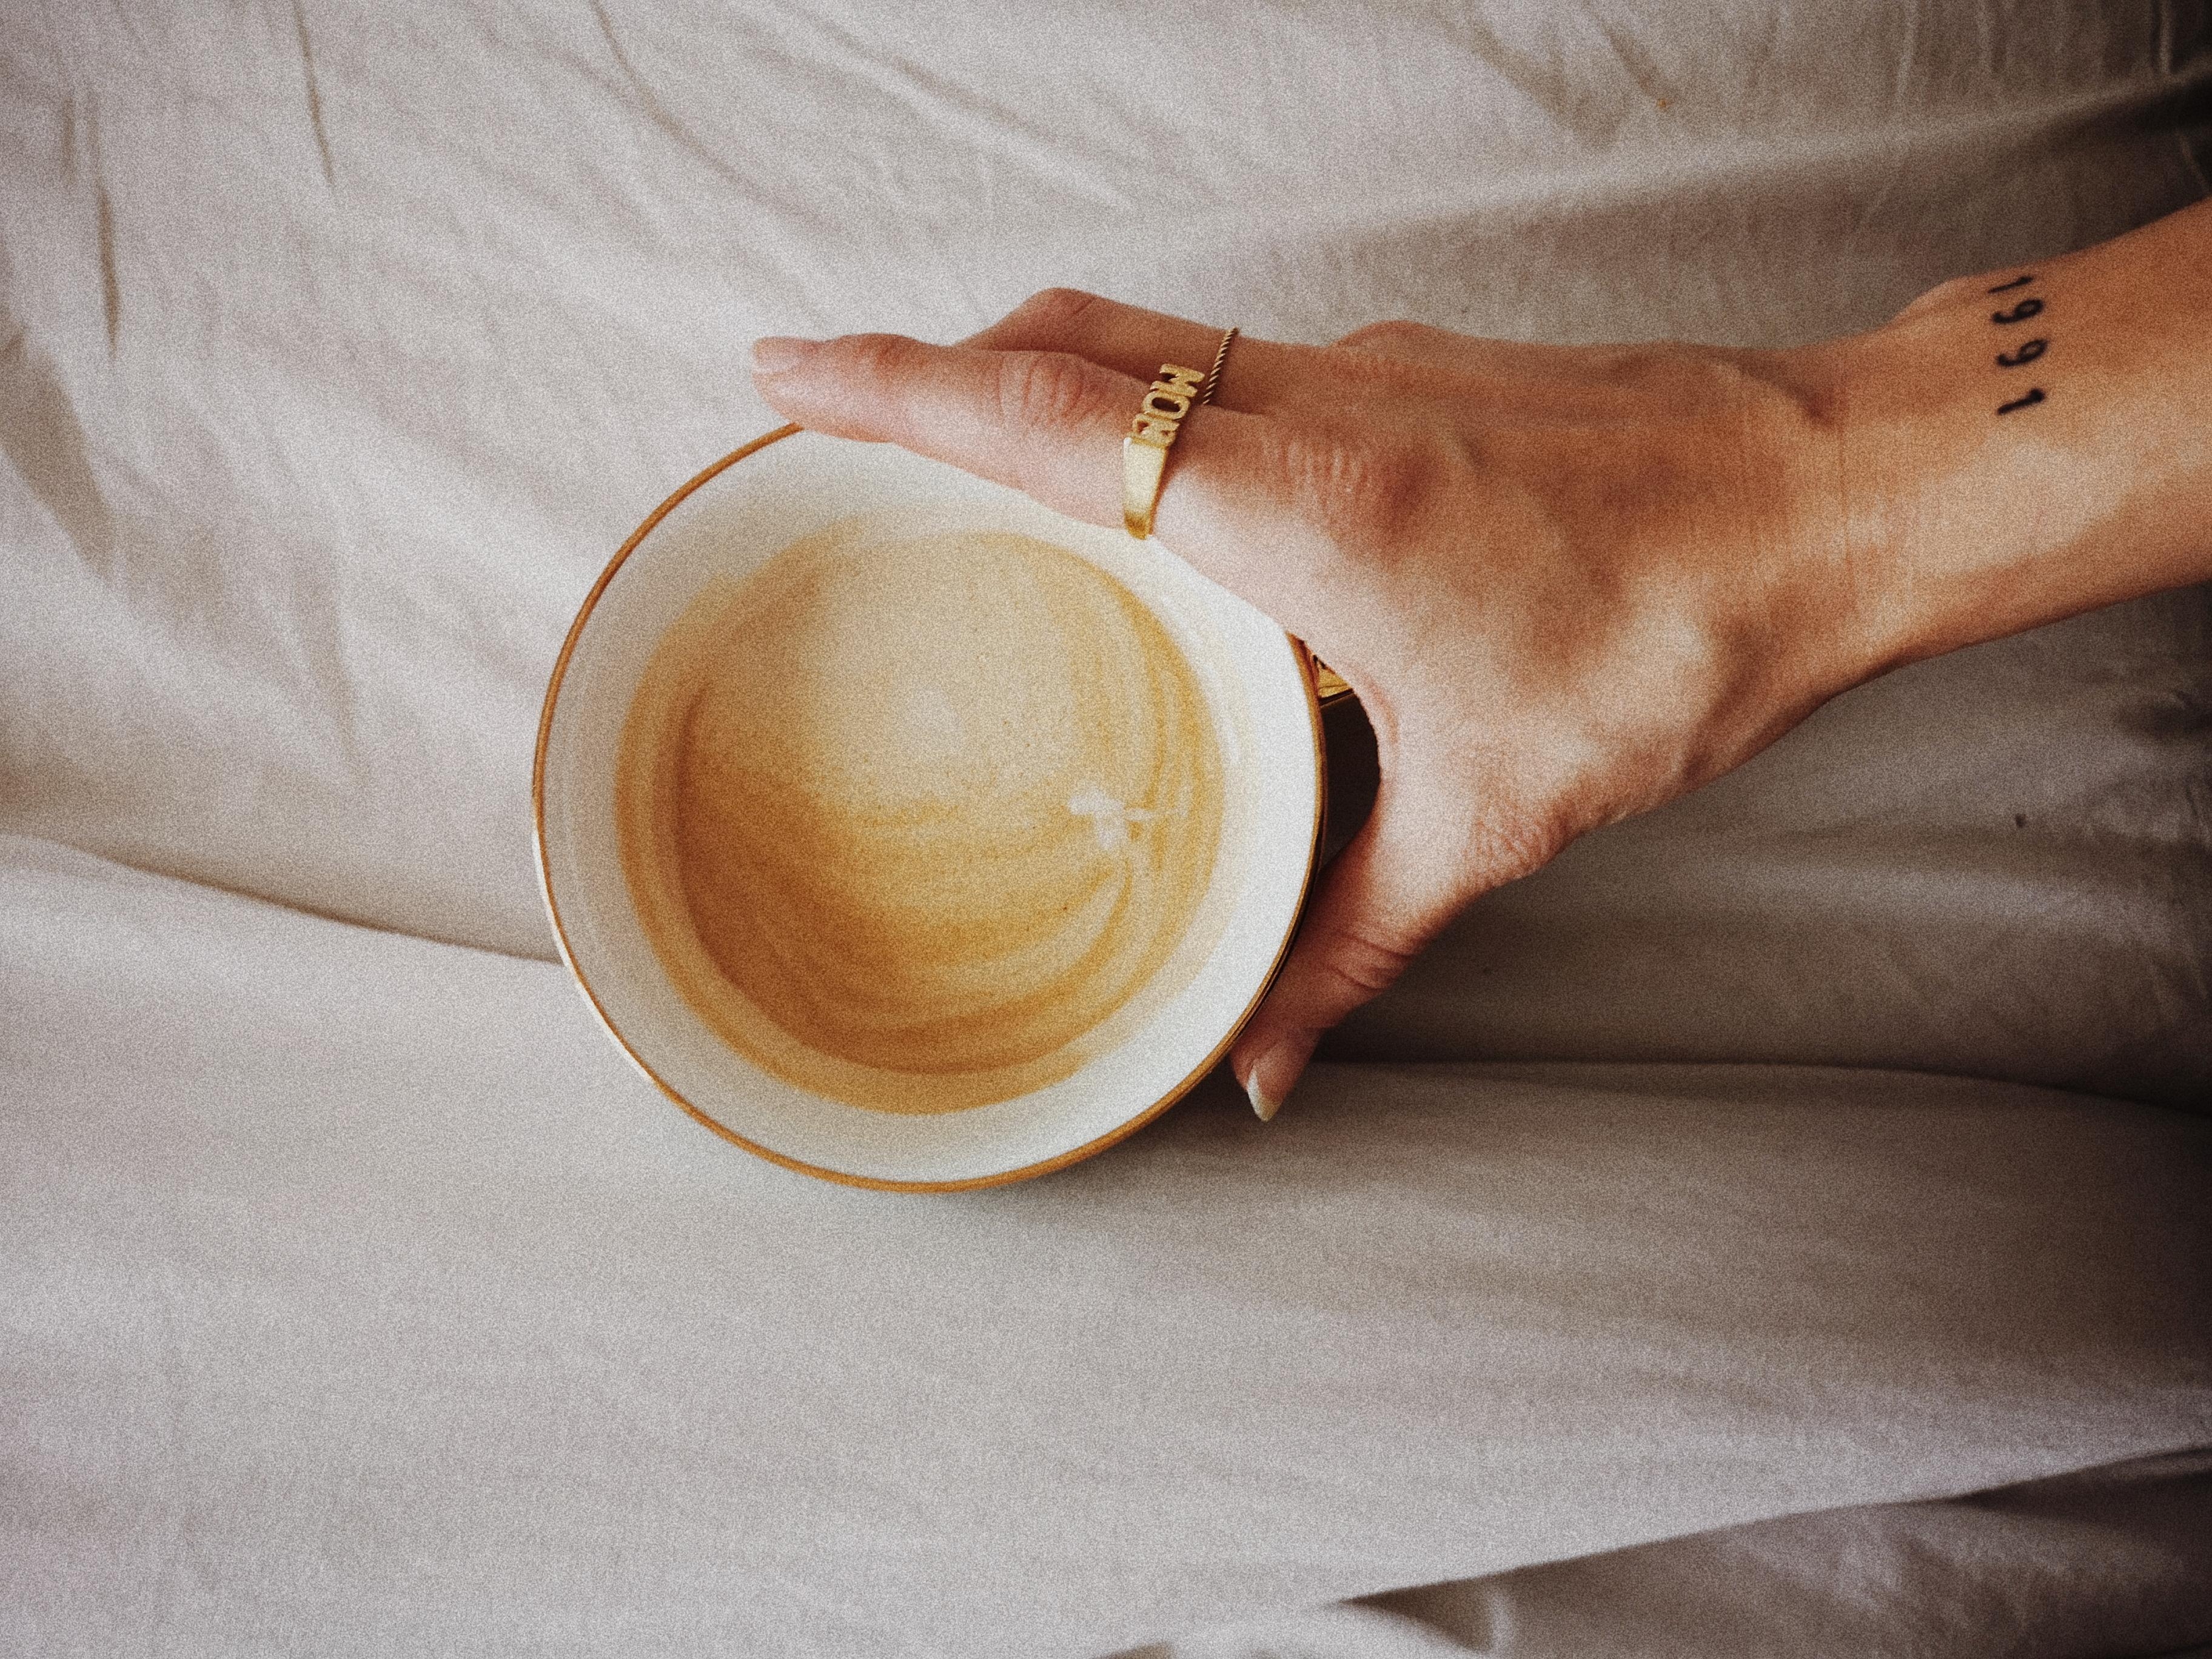 Never without #coffee #coffeelove #coffeemug #photography #minimalism #couchstyle #ink #tattoo #kleinestattoo